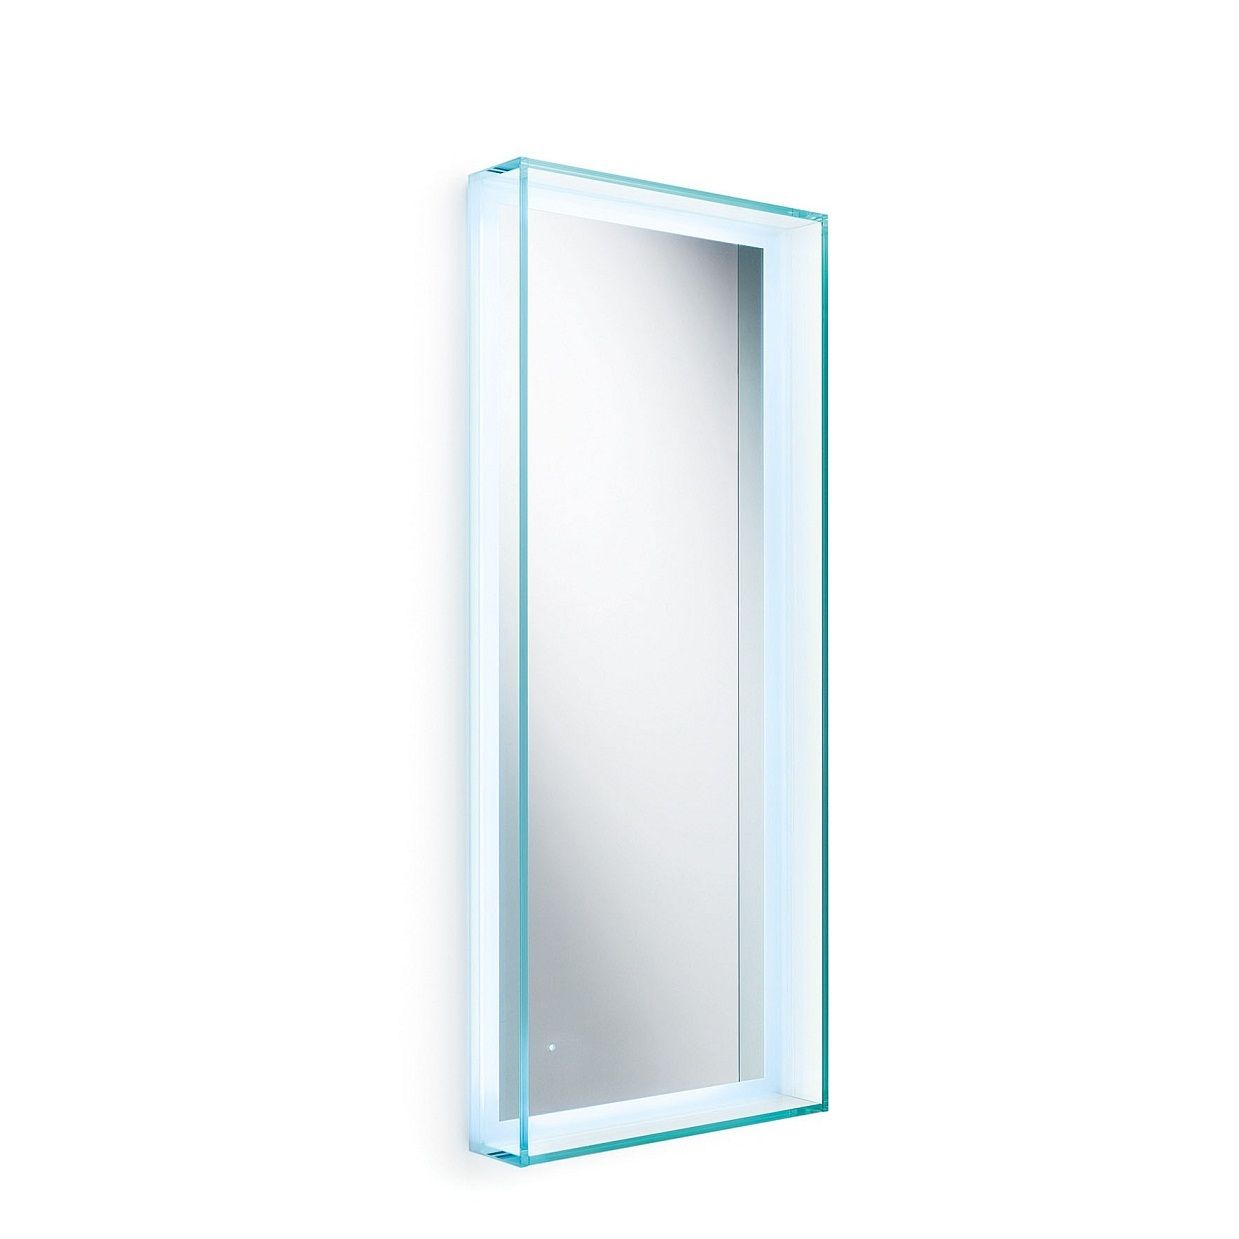 Should I Buy an LED Bathroom Mirror? A Comprehensive Guide